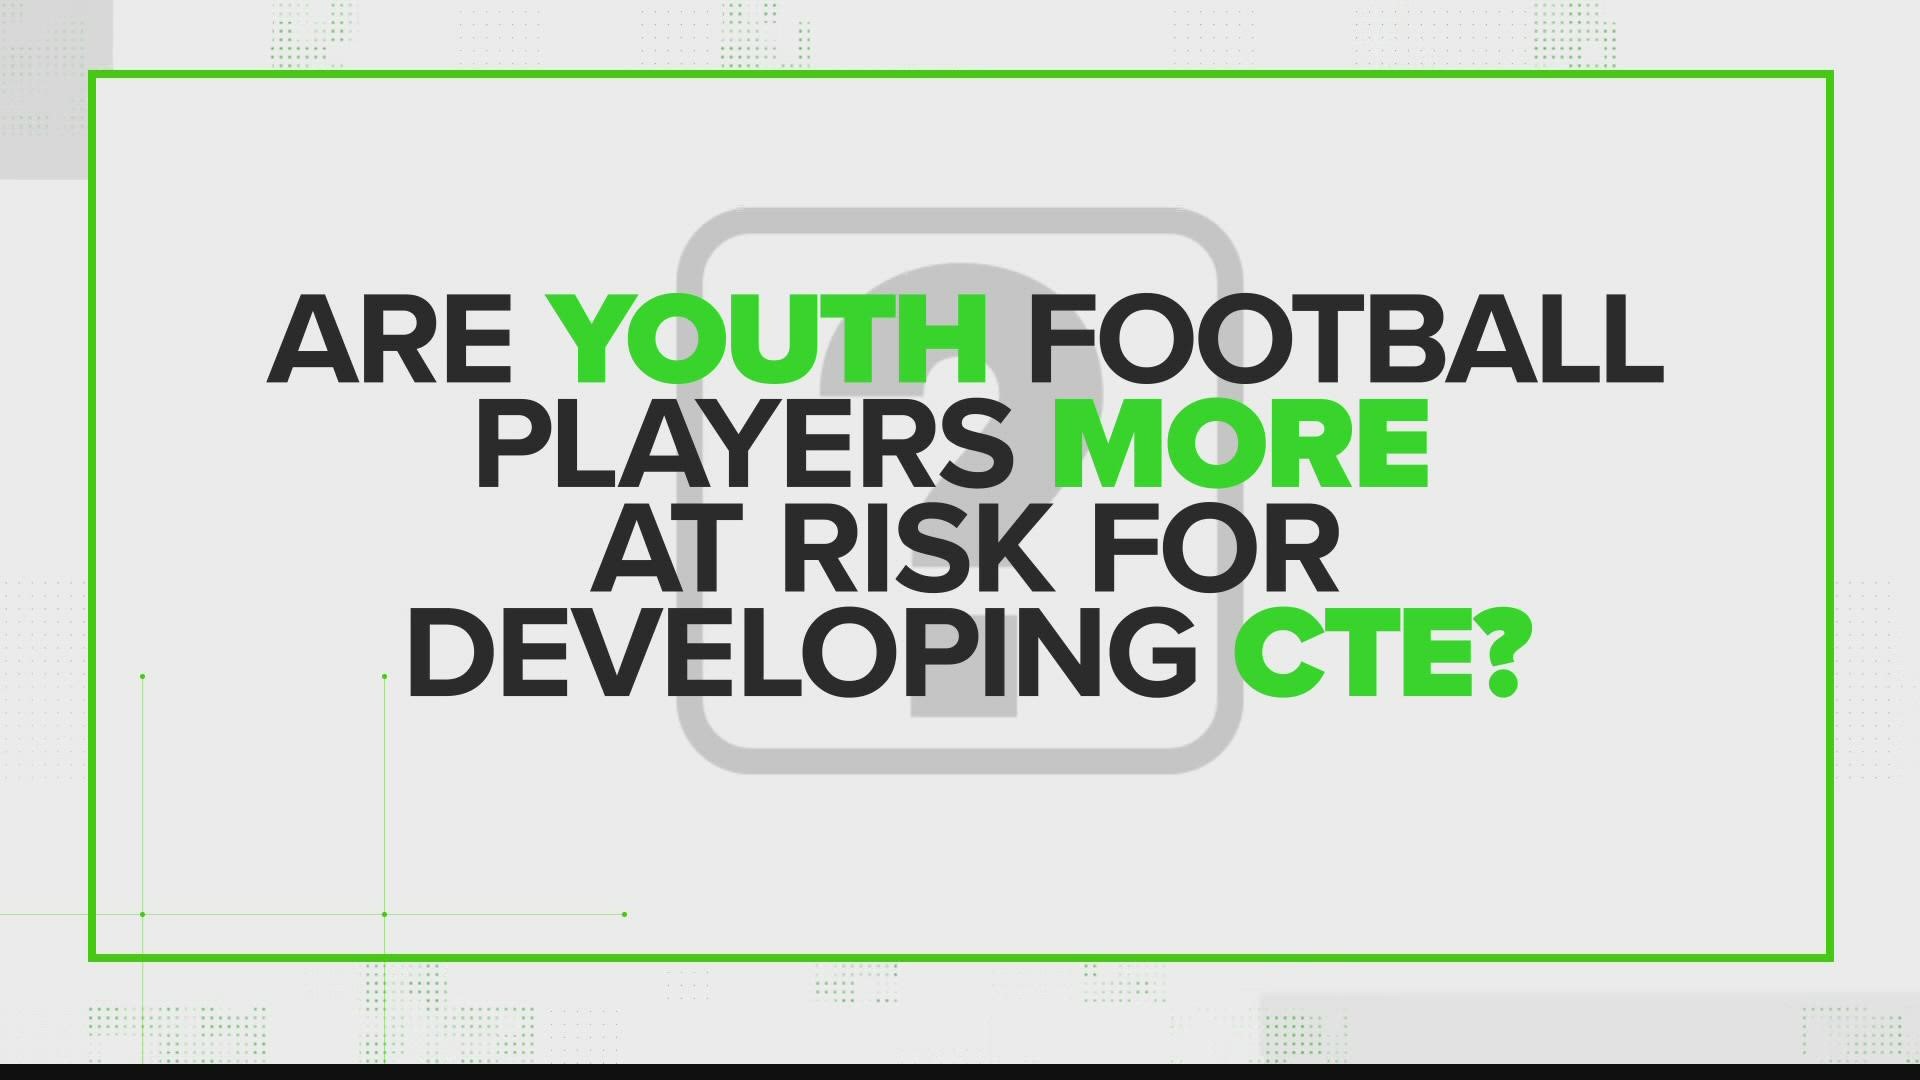 CTE is a brain disease caused by concussions.